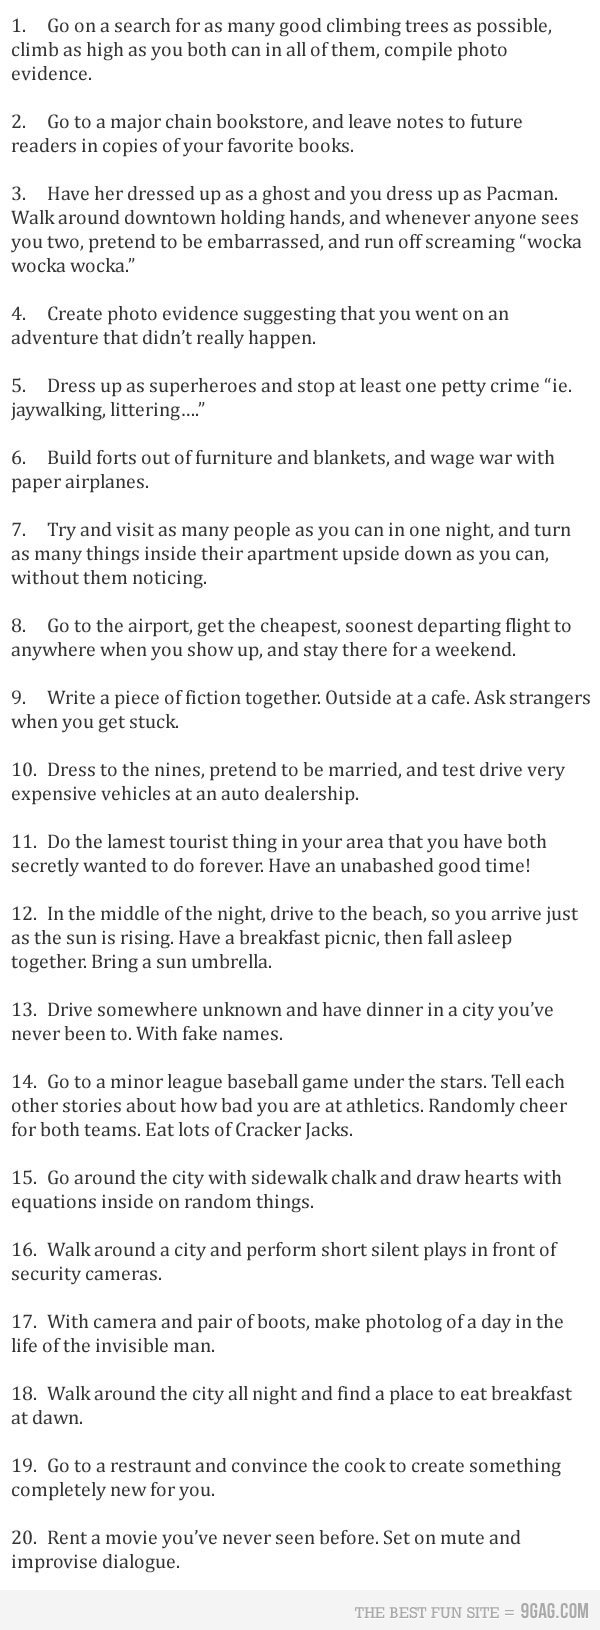 10 Gorgeous Good Ideas For A Date 174 best date ideas images on pinterest my love good ideas and 2022